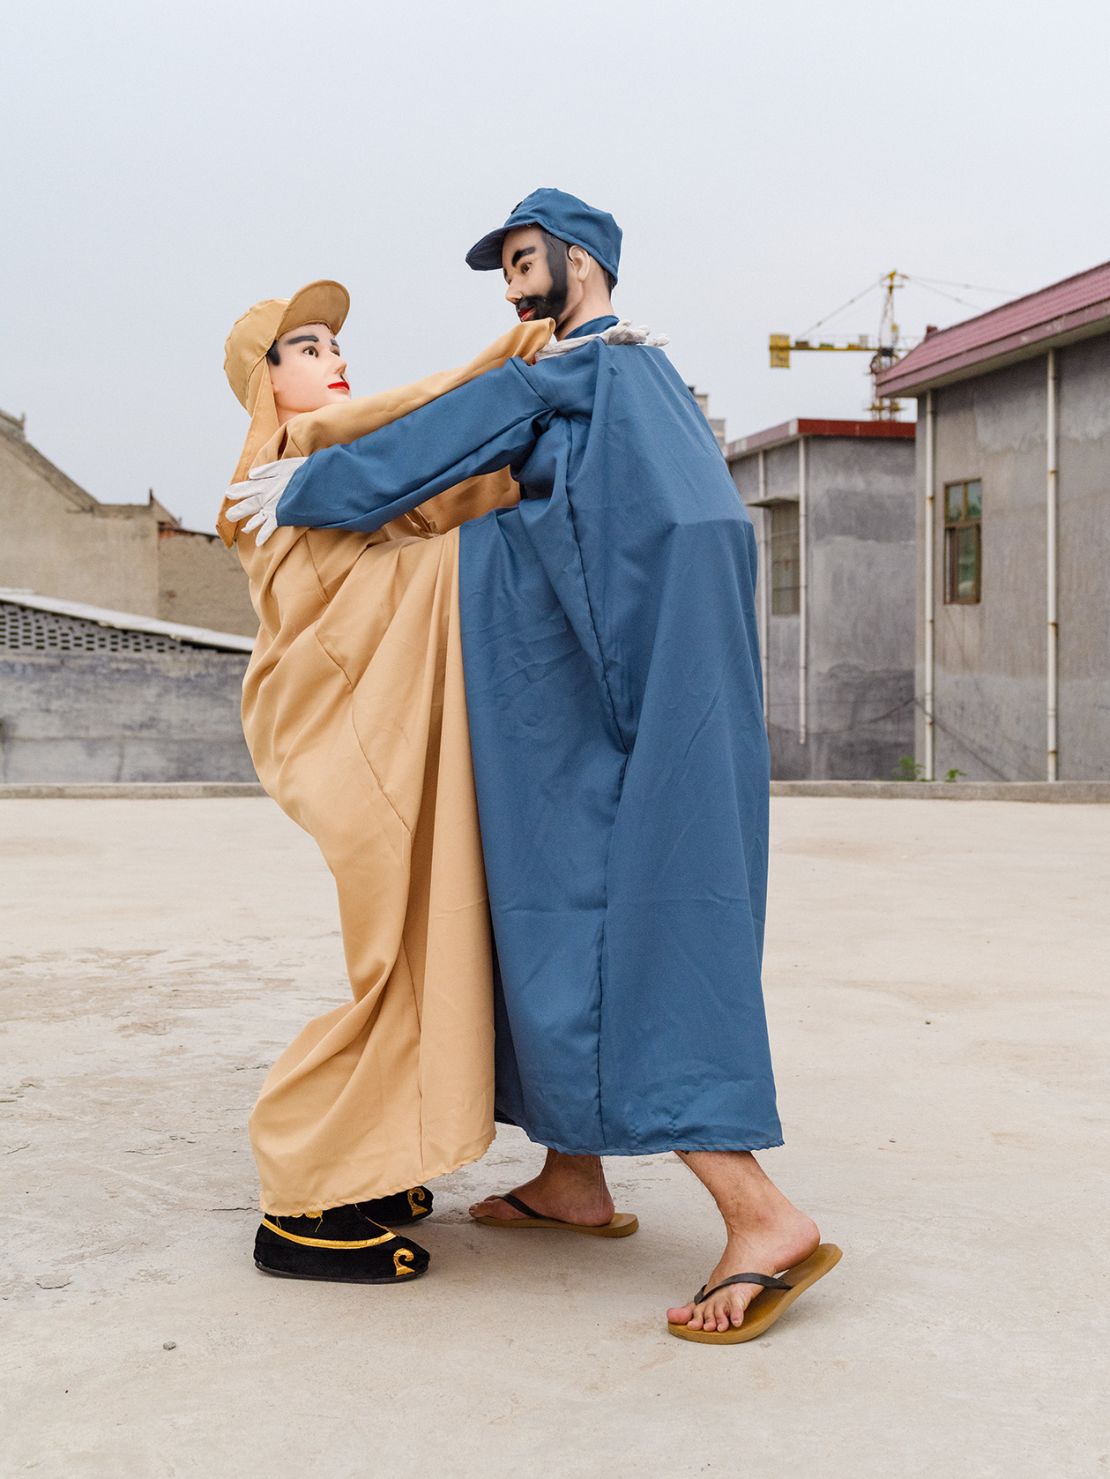 Shehuo performers wrestle, reenacting their on-stage scene as soldiers of the Chinese Eighth Route and Japanese armies, Huozhuang Village, Henan Province, 2018; from Community Fire (Aperture, 2023).